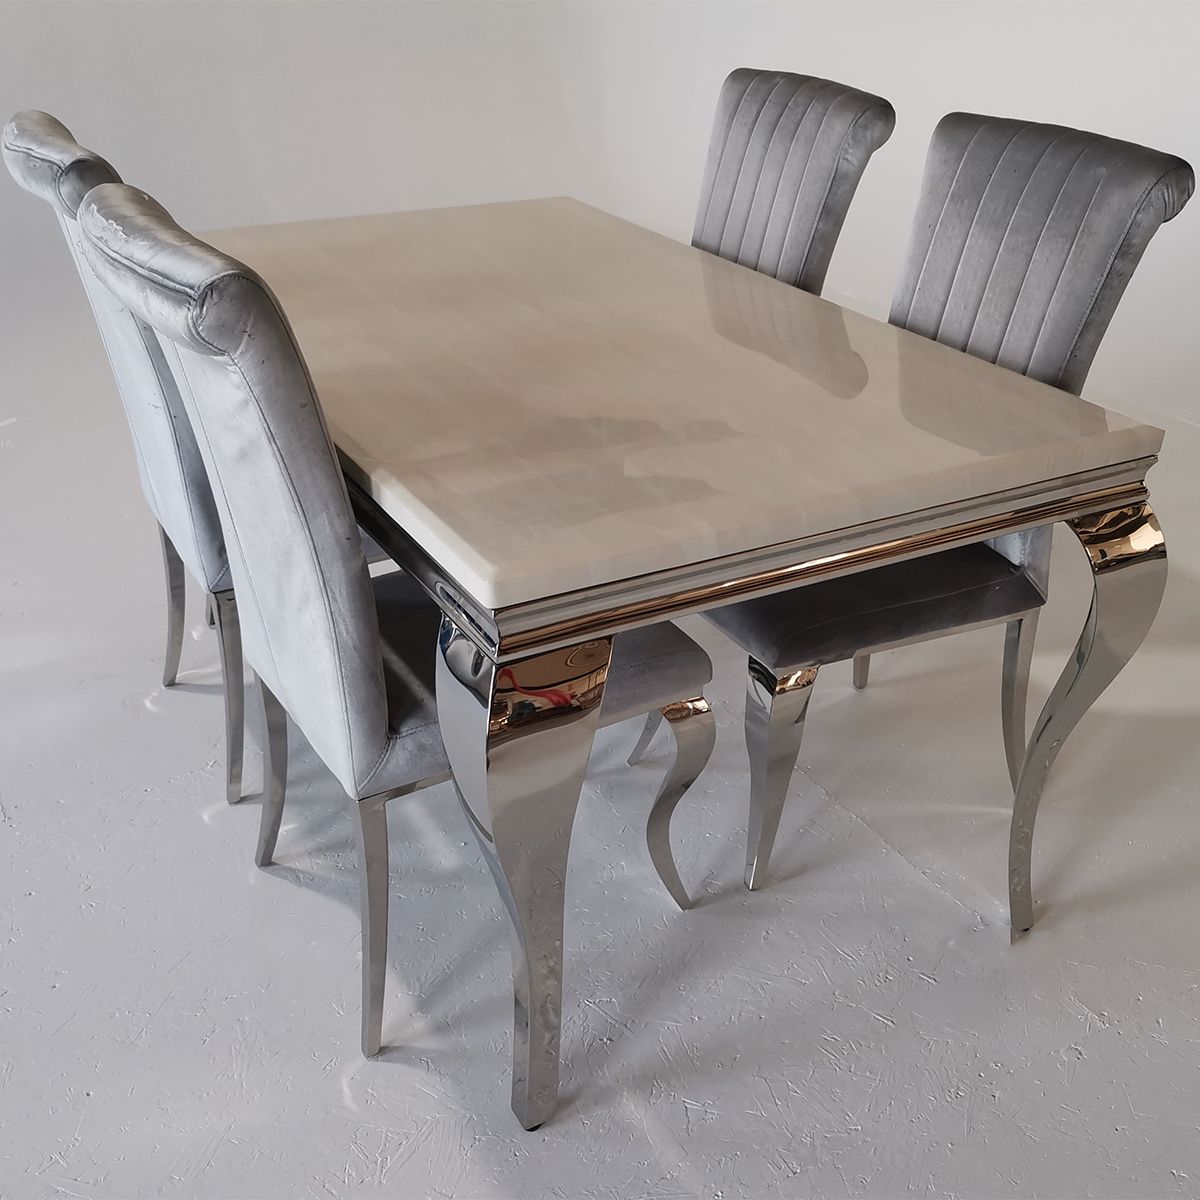 High Gloss Dining Tables and Chairs Set - Best Gloss Dining Room Table ... High Dining Room Tables